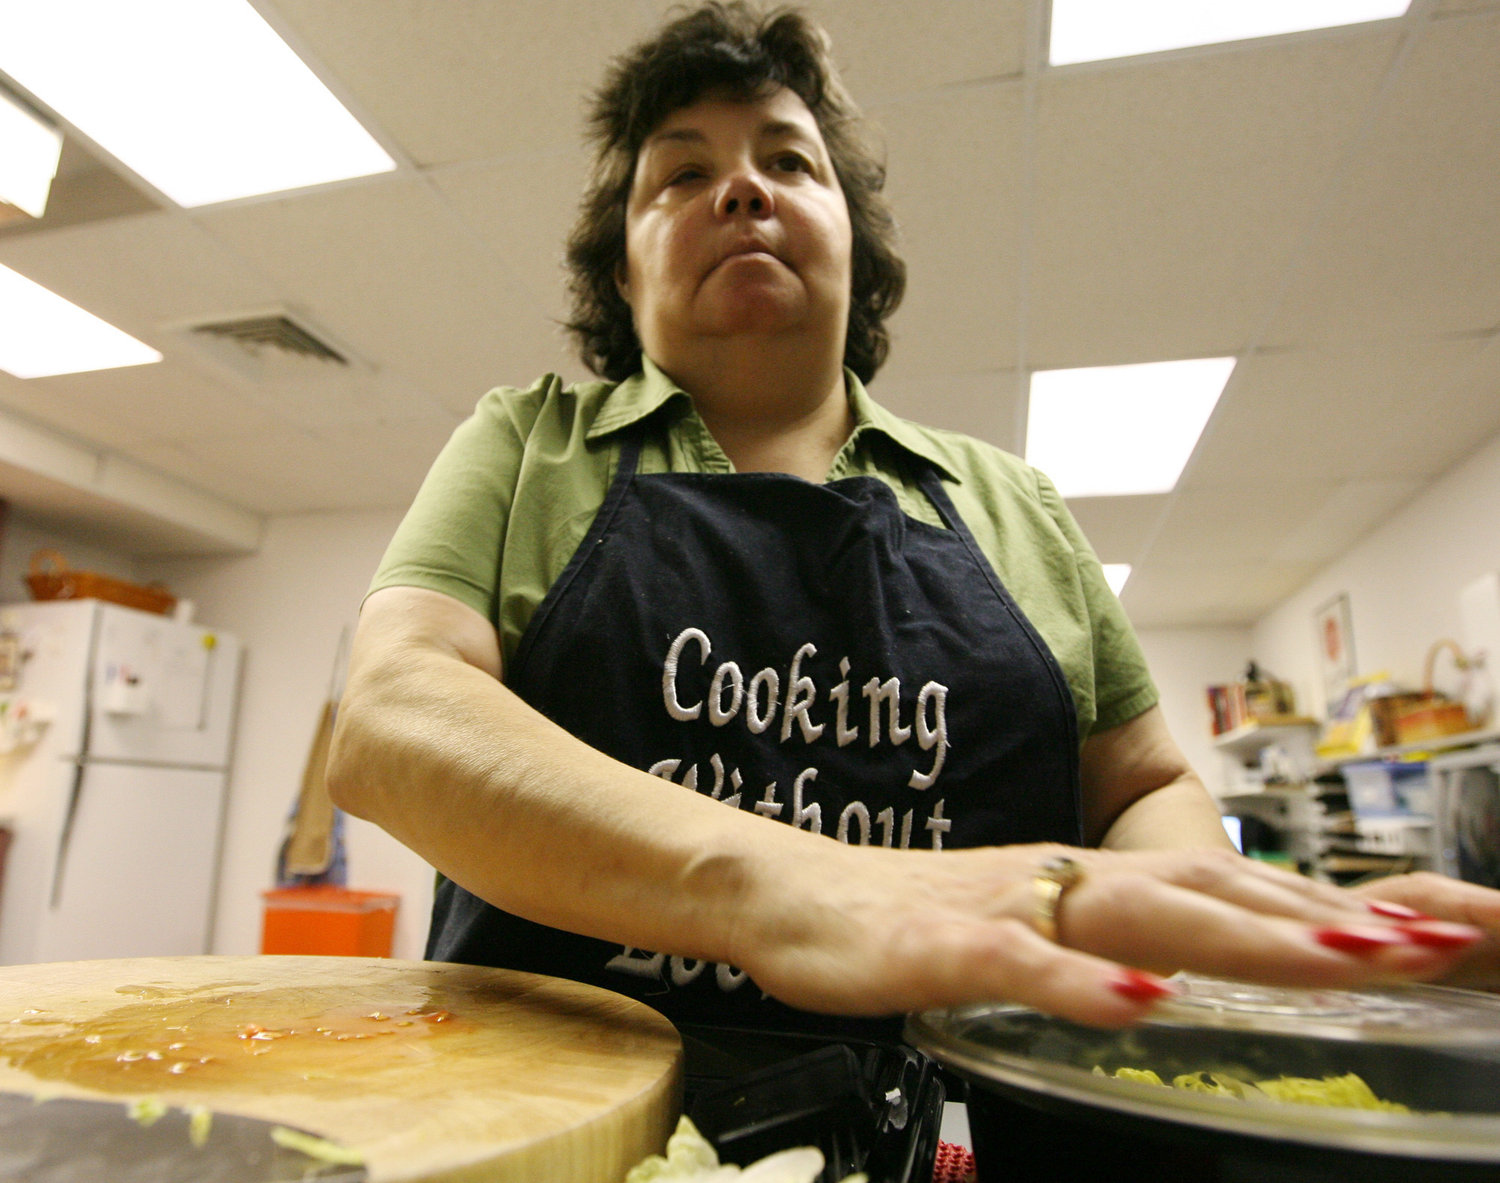 Cooking With Disabilities: An Exercise In Creative Problem Solving